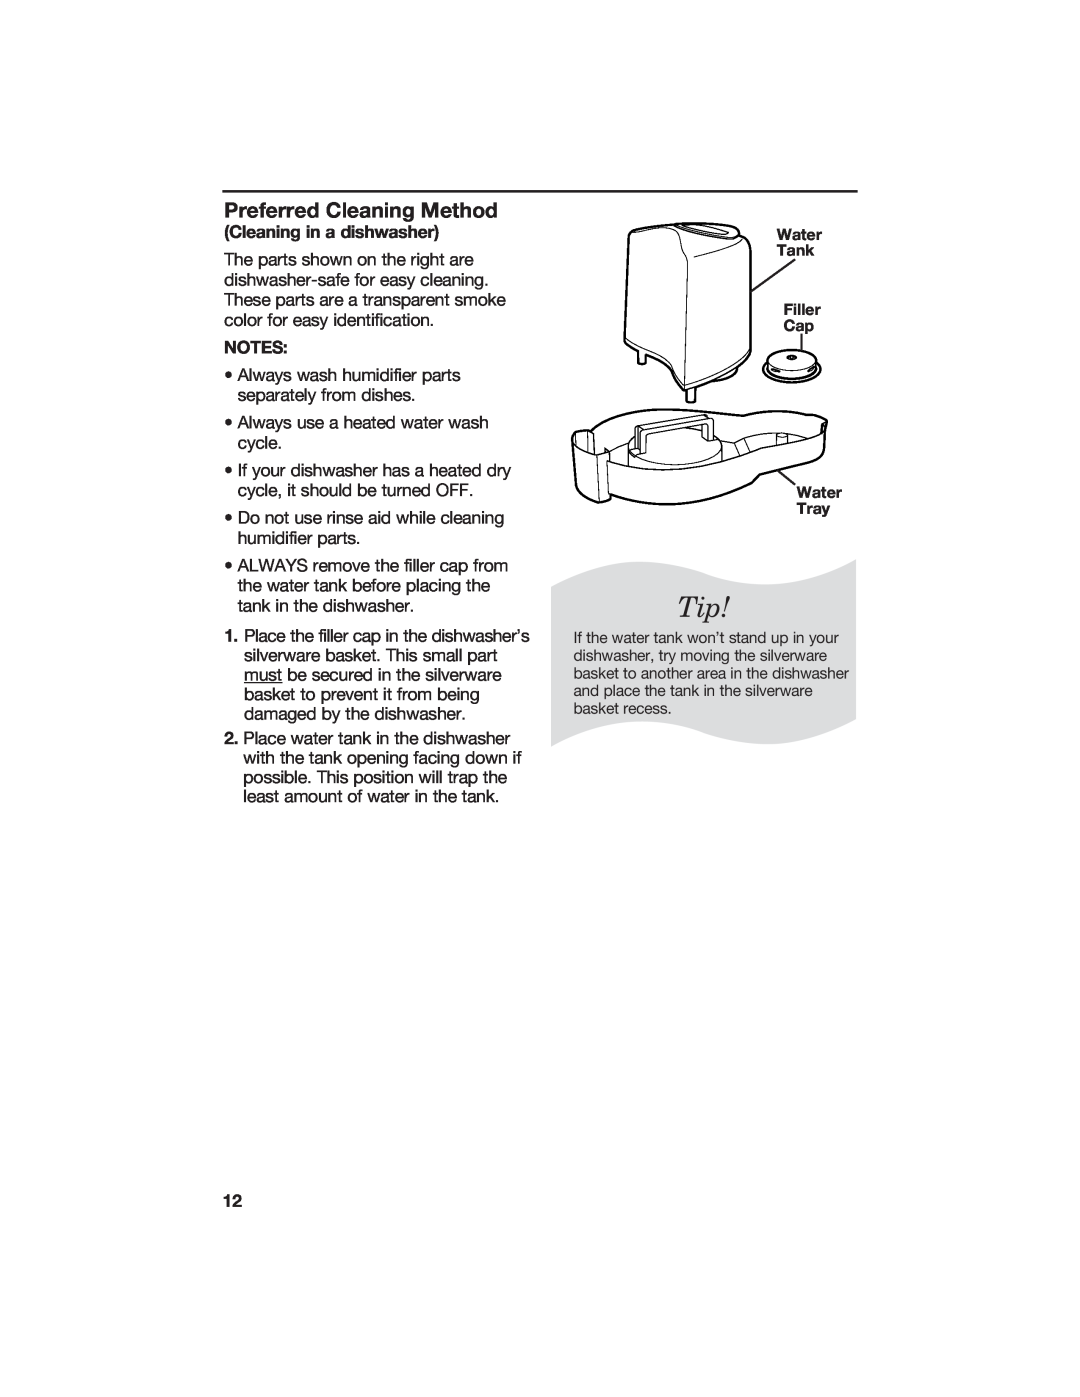 Hamilton Beach 840074800 manual Preferred Cleaning Method, Cleaning in a dishwasher, Notes 